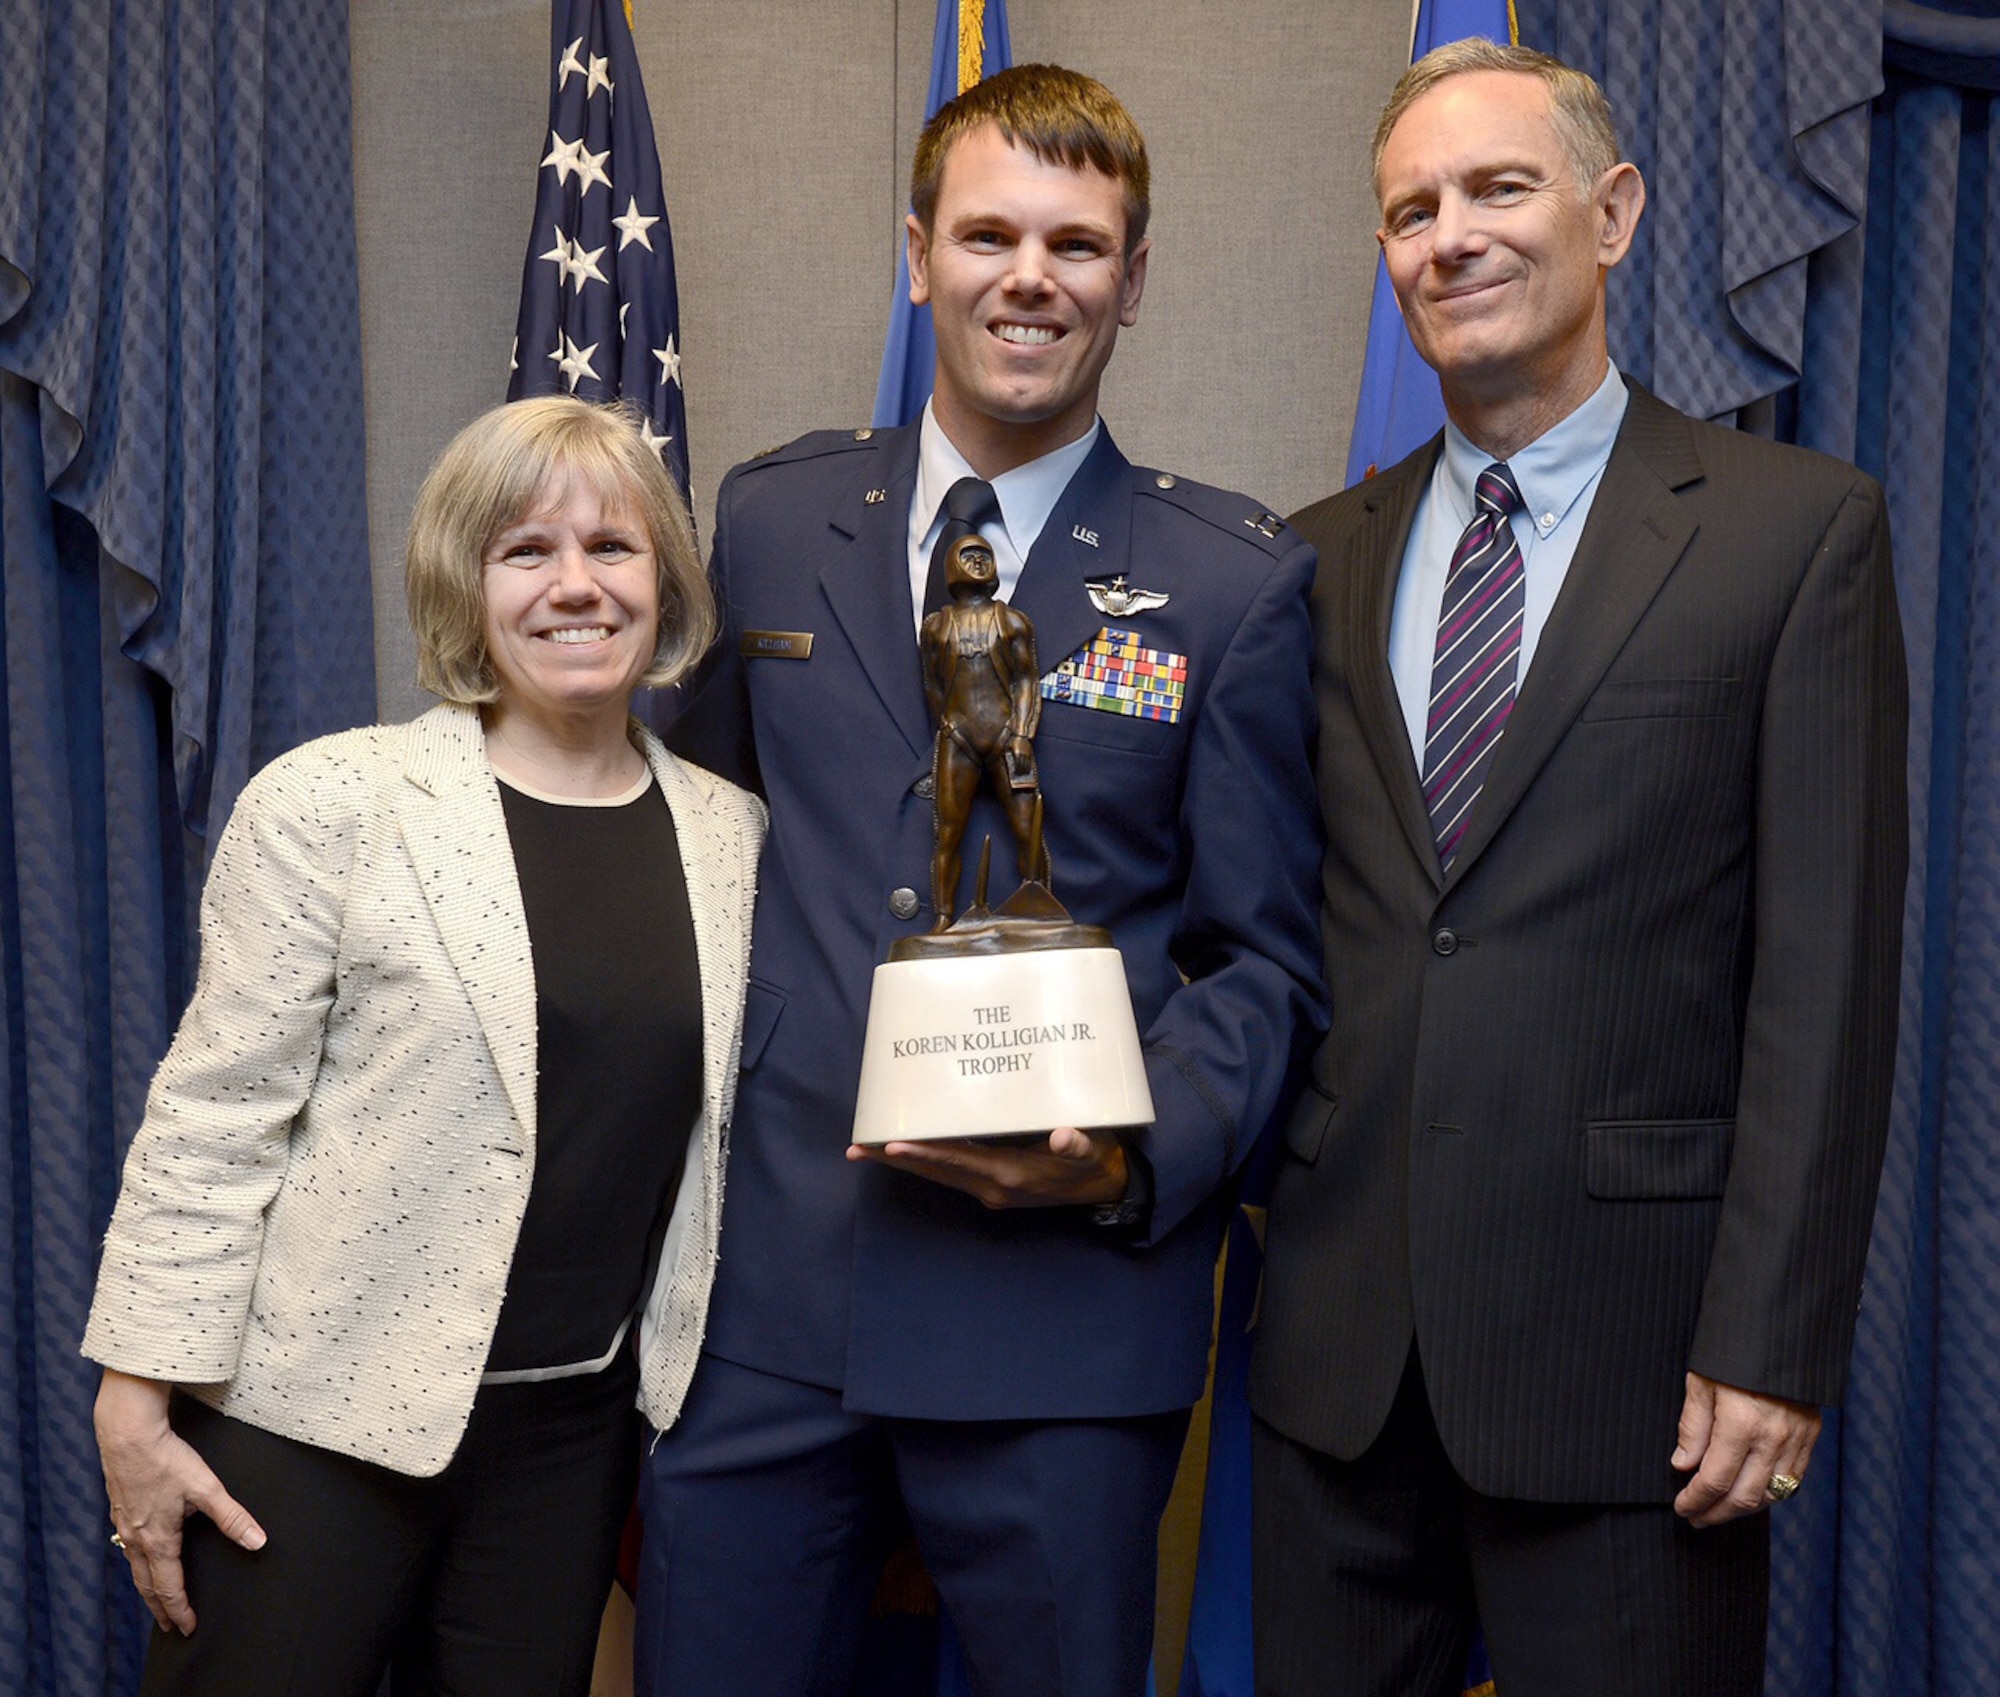 Capt. Timothy Killham, an F-35 Lightning II pilot from the 33rd Flying Training Squadron at Eglin Air Force Base, Fla., stands with his mother, Diane Kuknyo, and his father, retired Lt. Col. Michael Killham, after receiving the Koren Kolligian trophy during a Pentagon ceremony Sept. 23, 2015. The Kolligian Award recognizes outstanding airmanship by an aircrew member, and is named after 1st Lt. Koren Kolligian, who went missing while piloting his T-33 aircraft off the coast of California. (U.S. Air Force photo/Scott M. Ash)